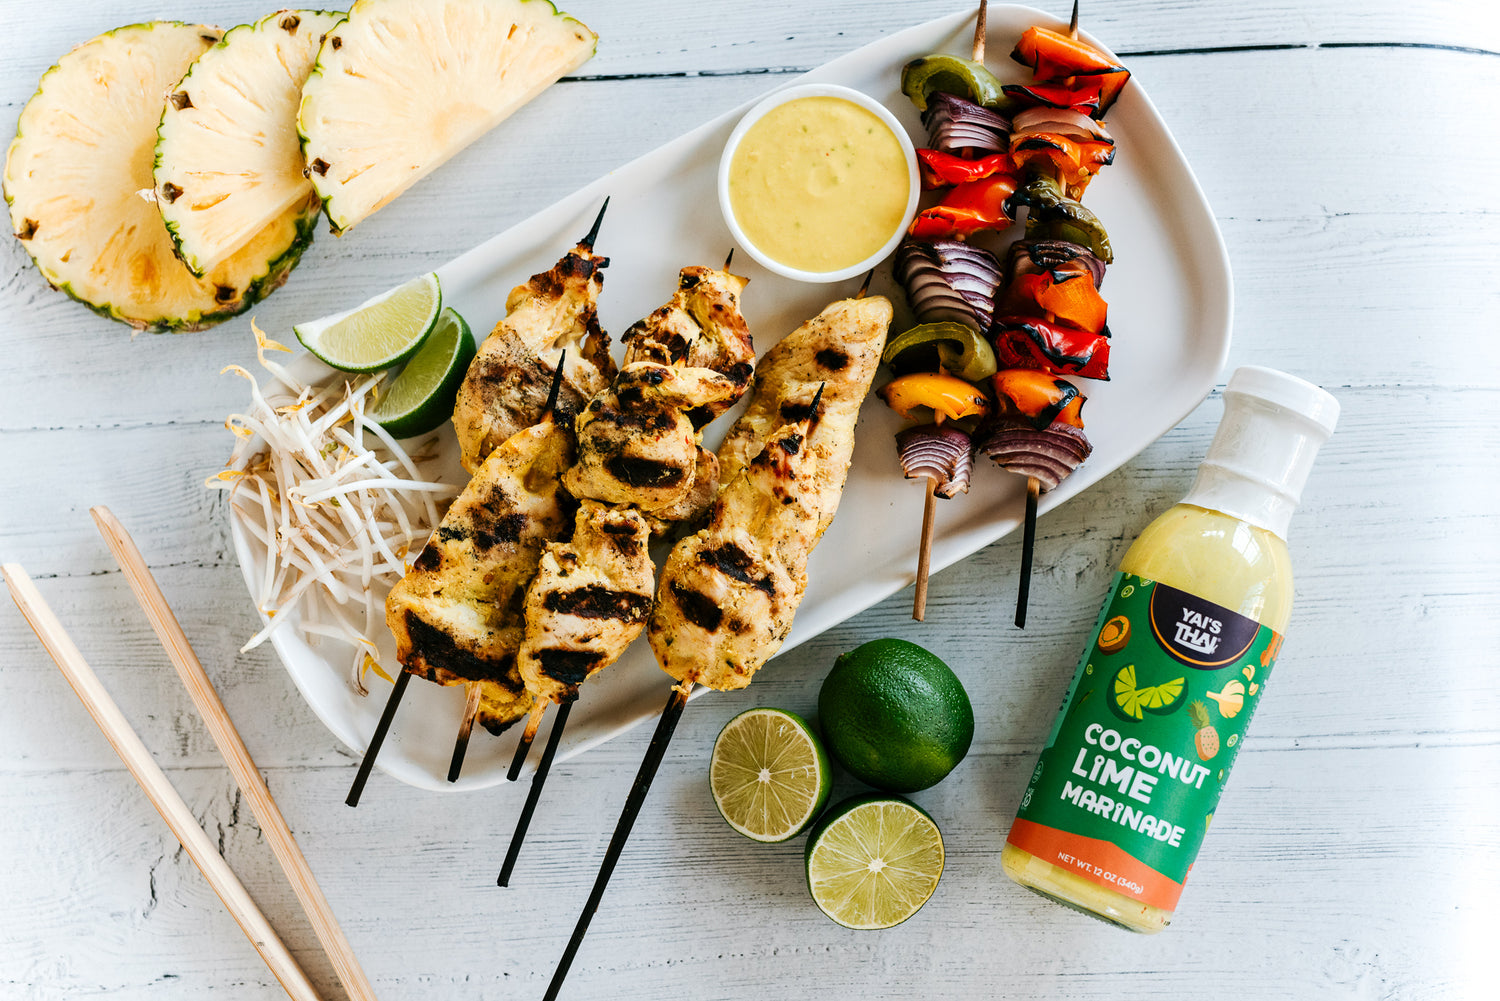 Thai Chicken Satay with Yai's Thai Coconut Lime Marinade - Easy Grilling Recipe